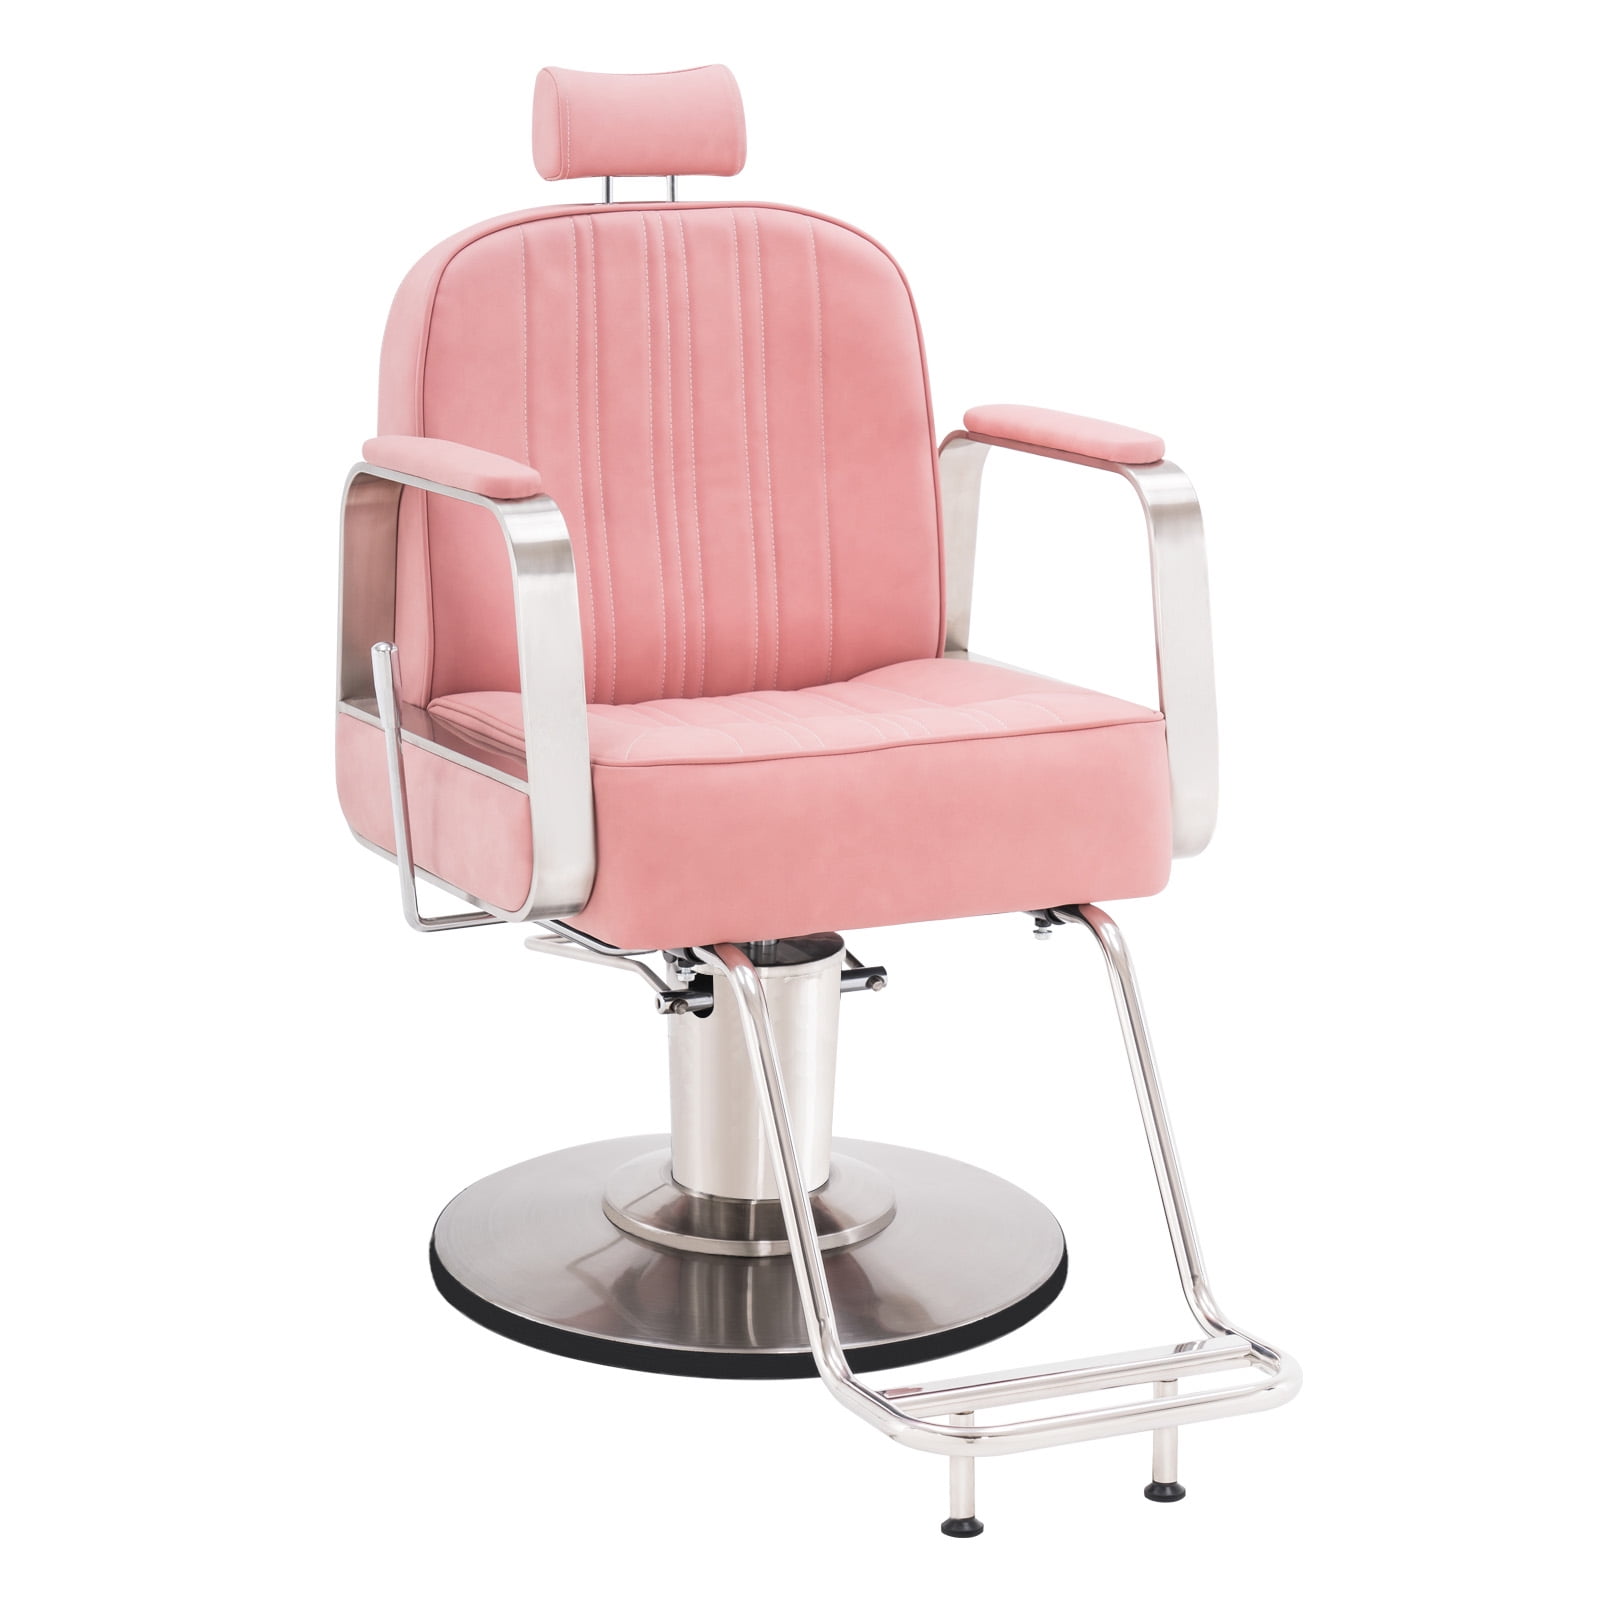 BarberPub Salon Chair for Hair Stylist, All Purpose Hydraulic Barber Styling  Chair 8548 Pink 